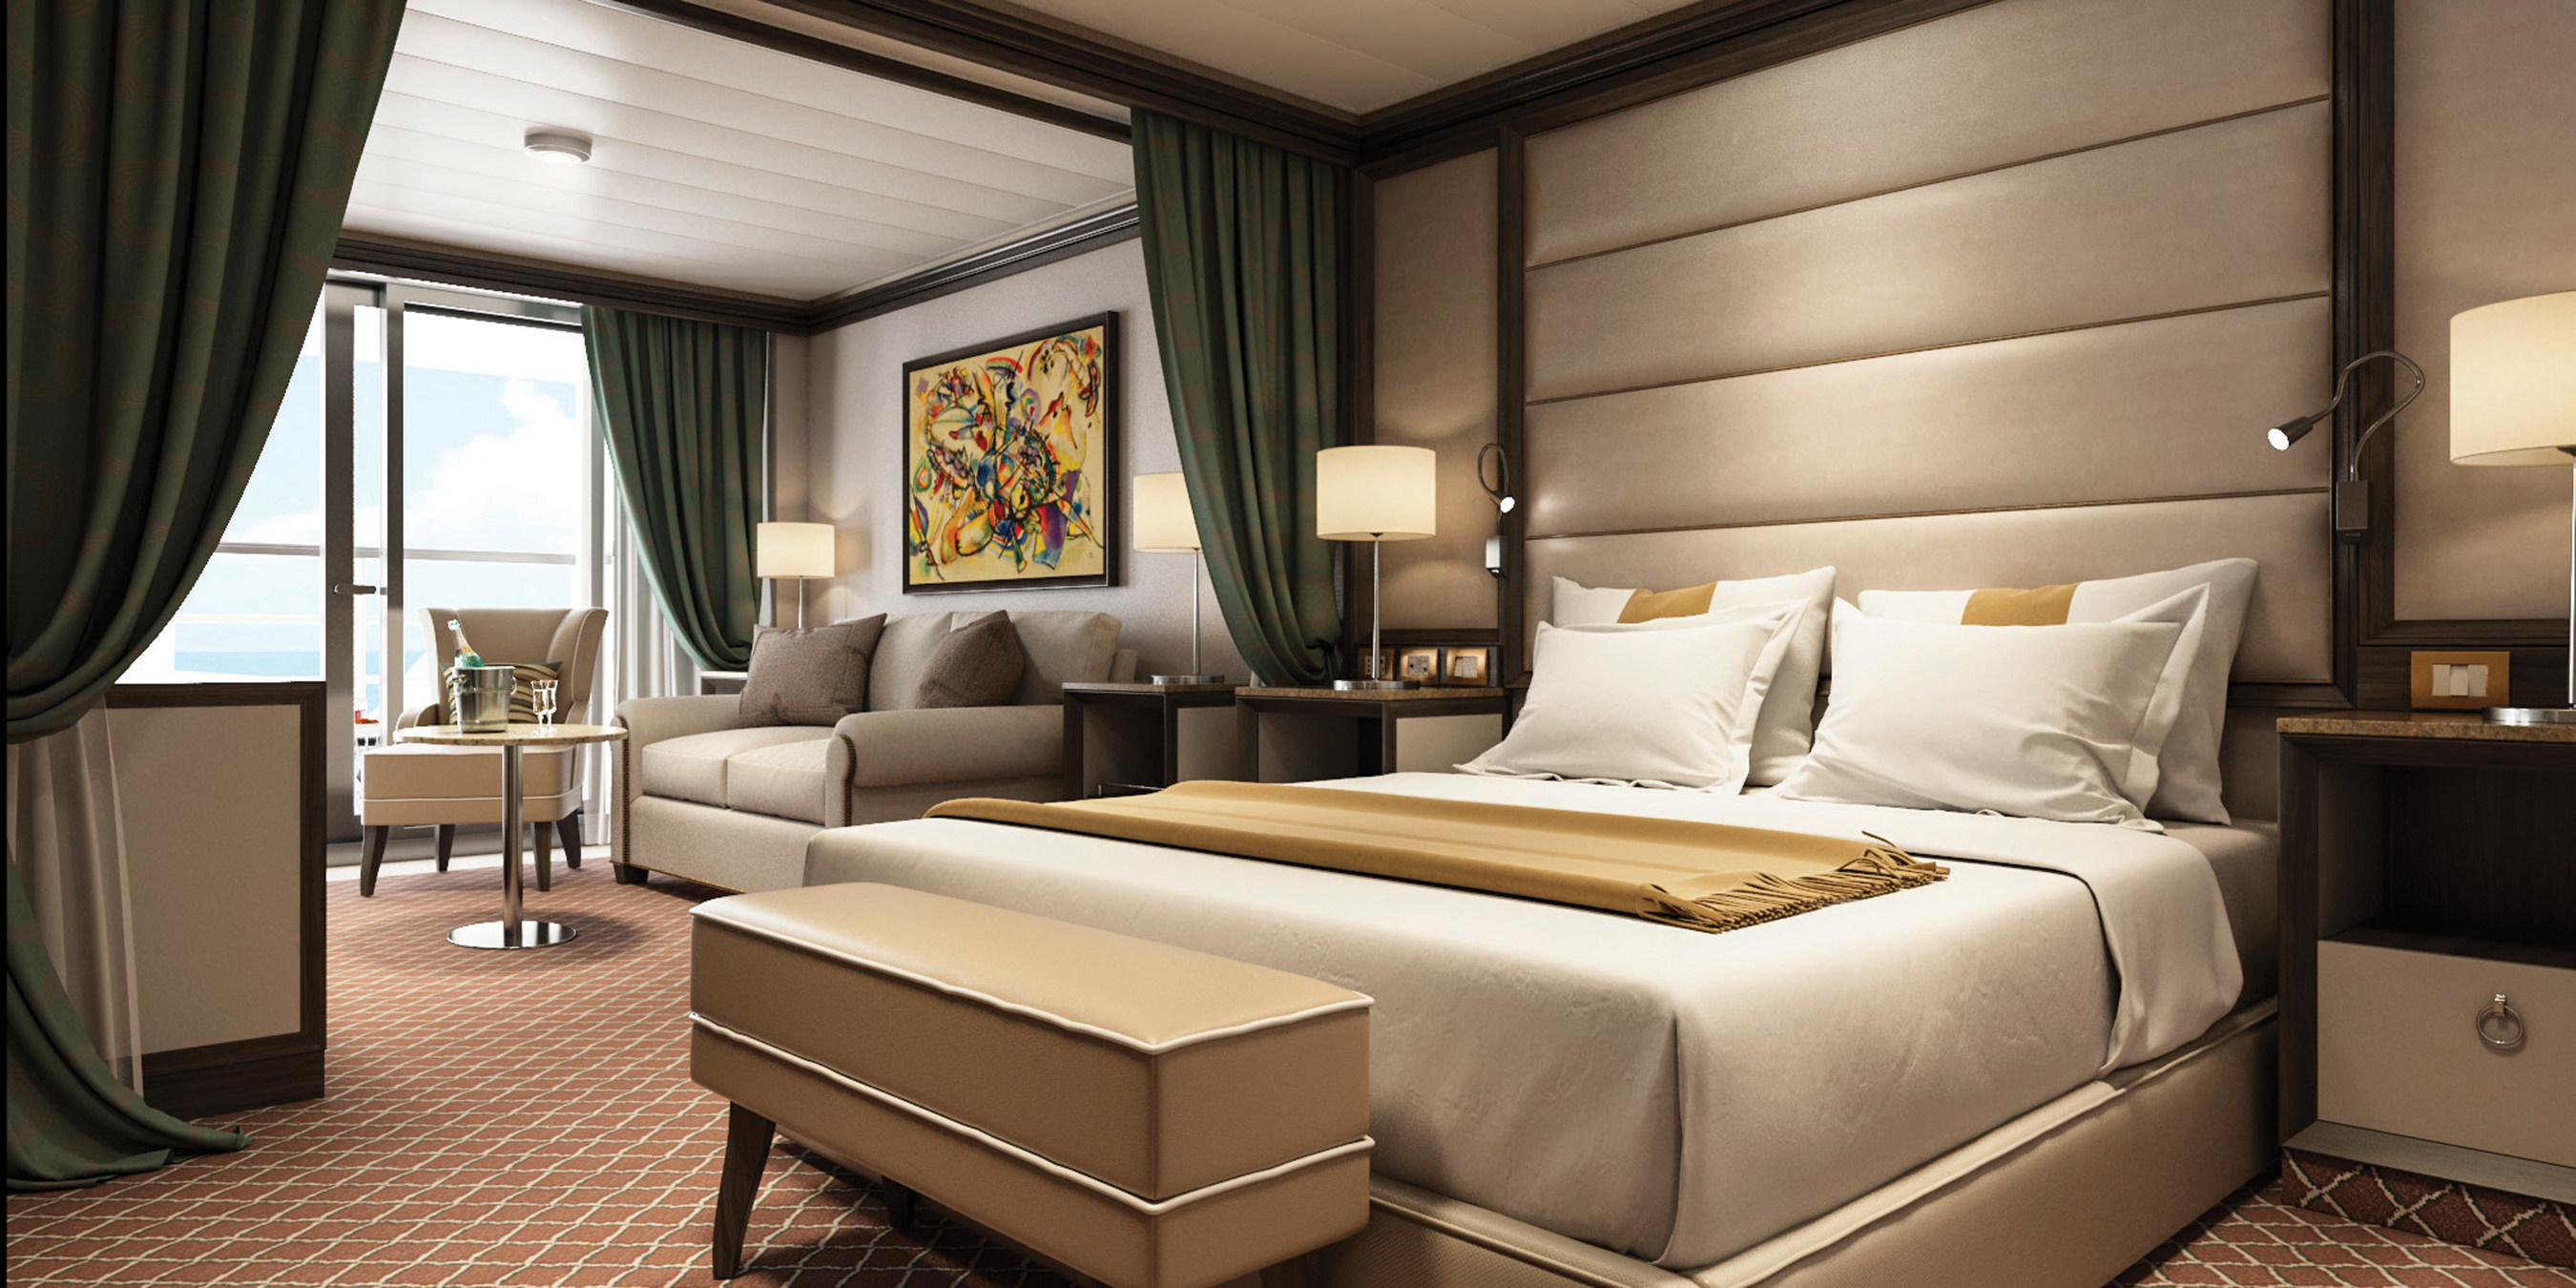 The Veranda Suite aboard Silver Muse provides generous living space for voyagers.